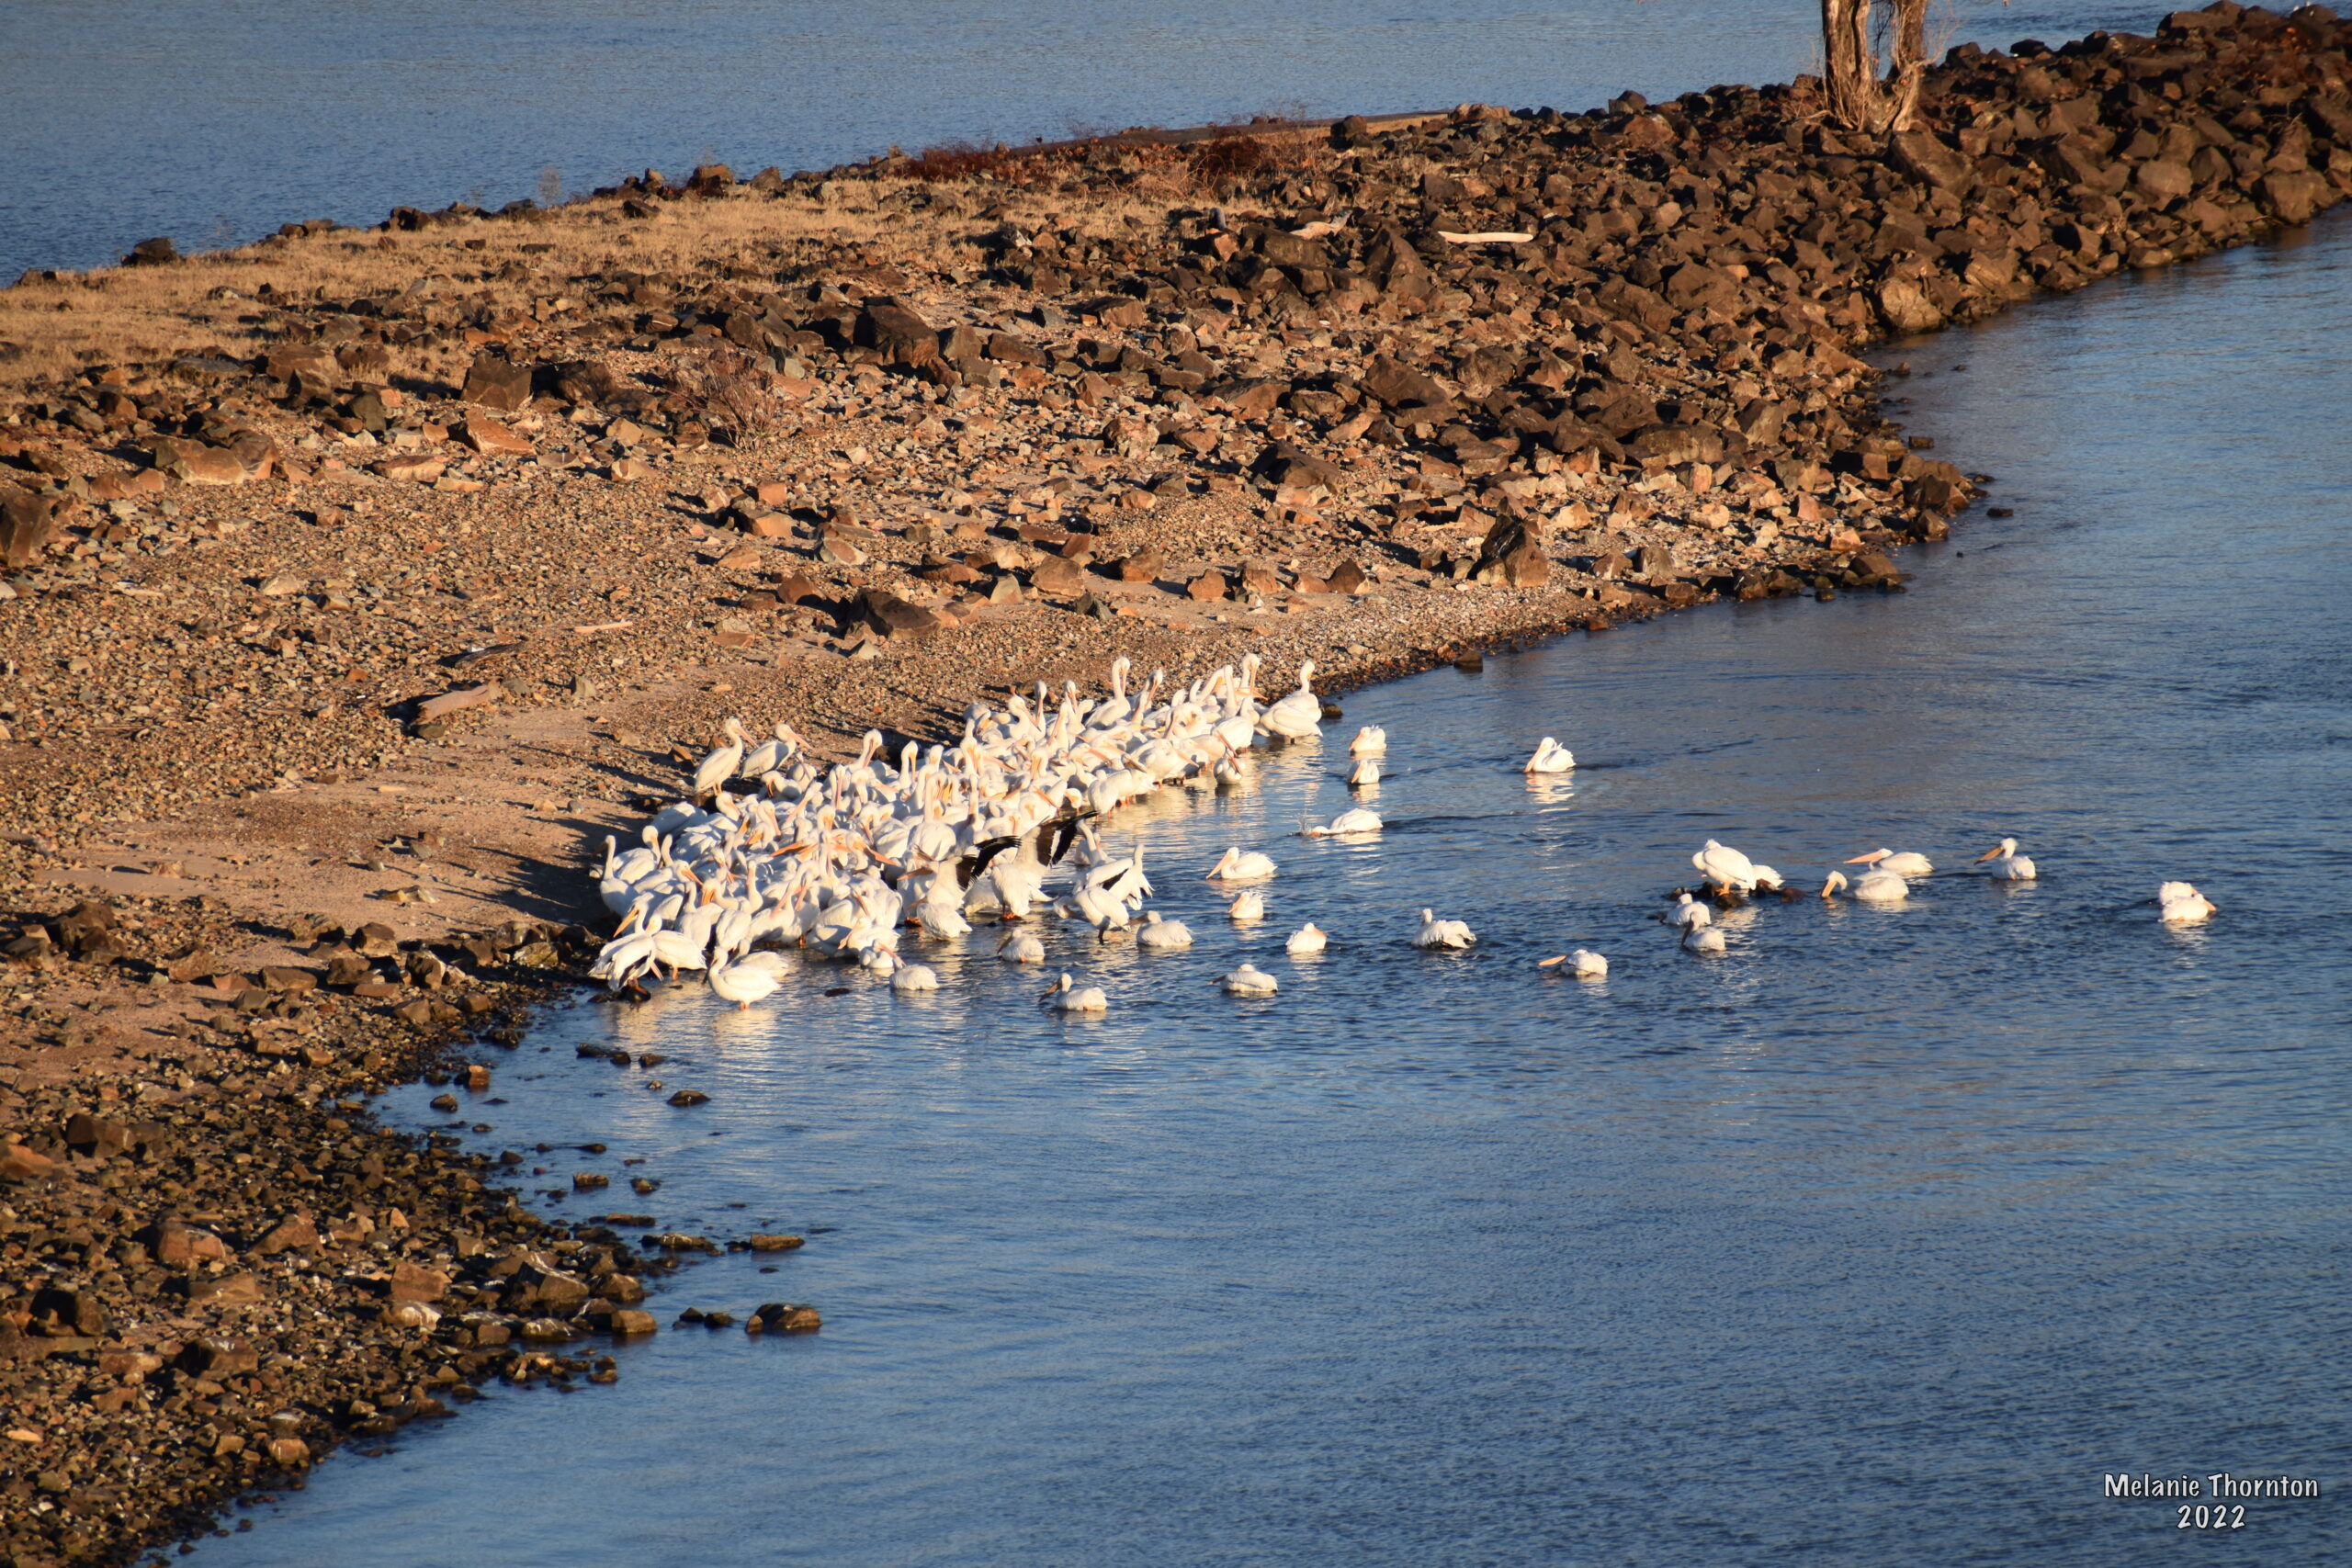 About thirty large white birds with long yellow-orange beaks are gathered together near the shoreline